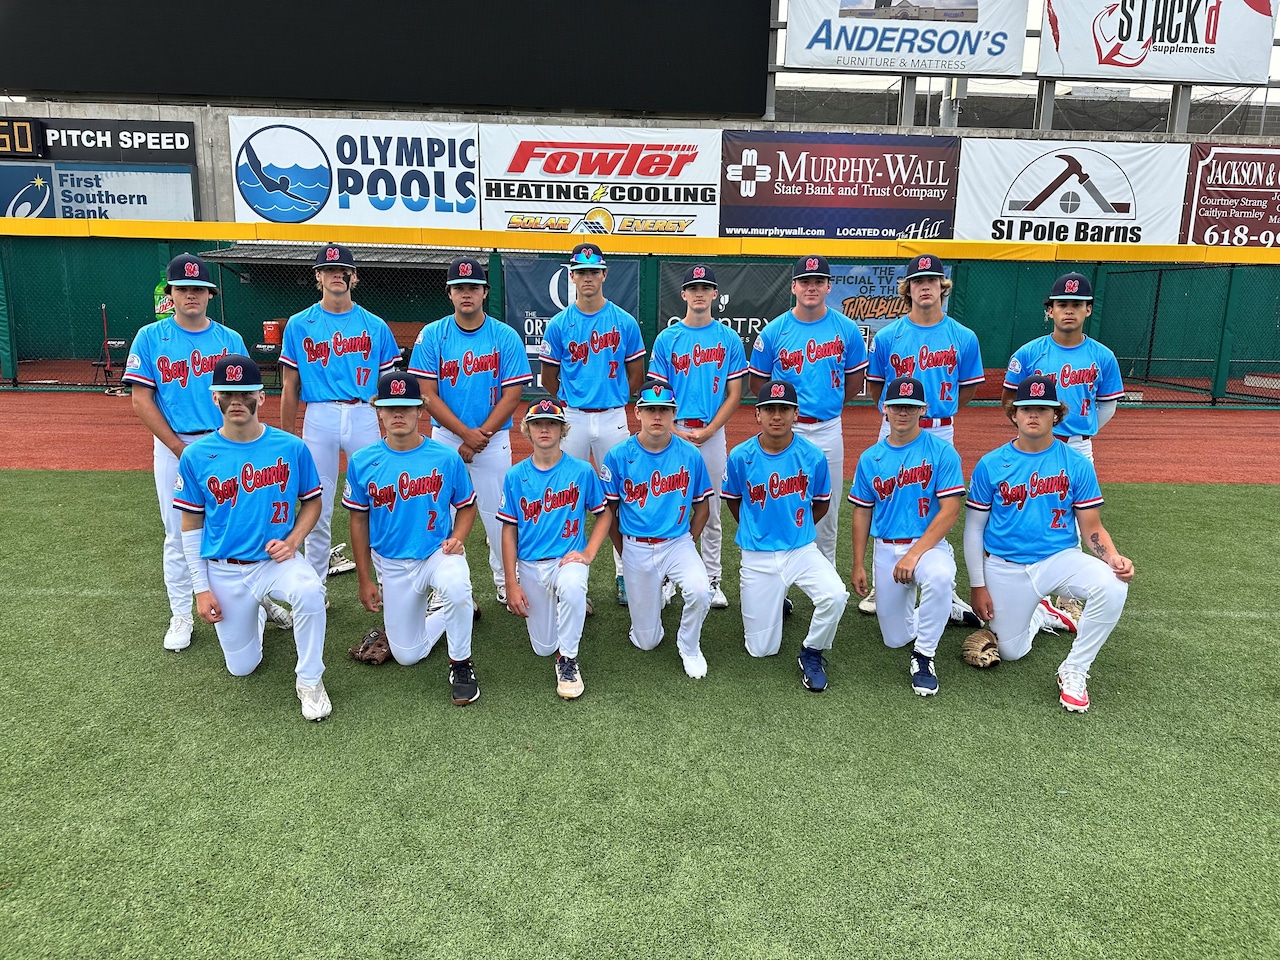 Bay County shows American spunk in Colt League World Series clash with Czech [Video]